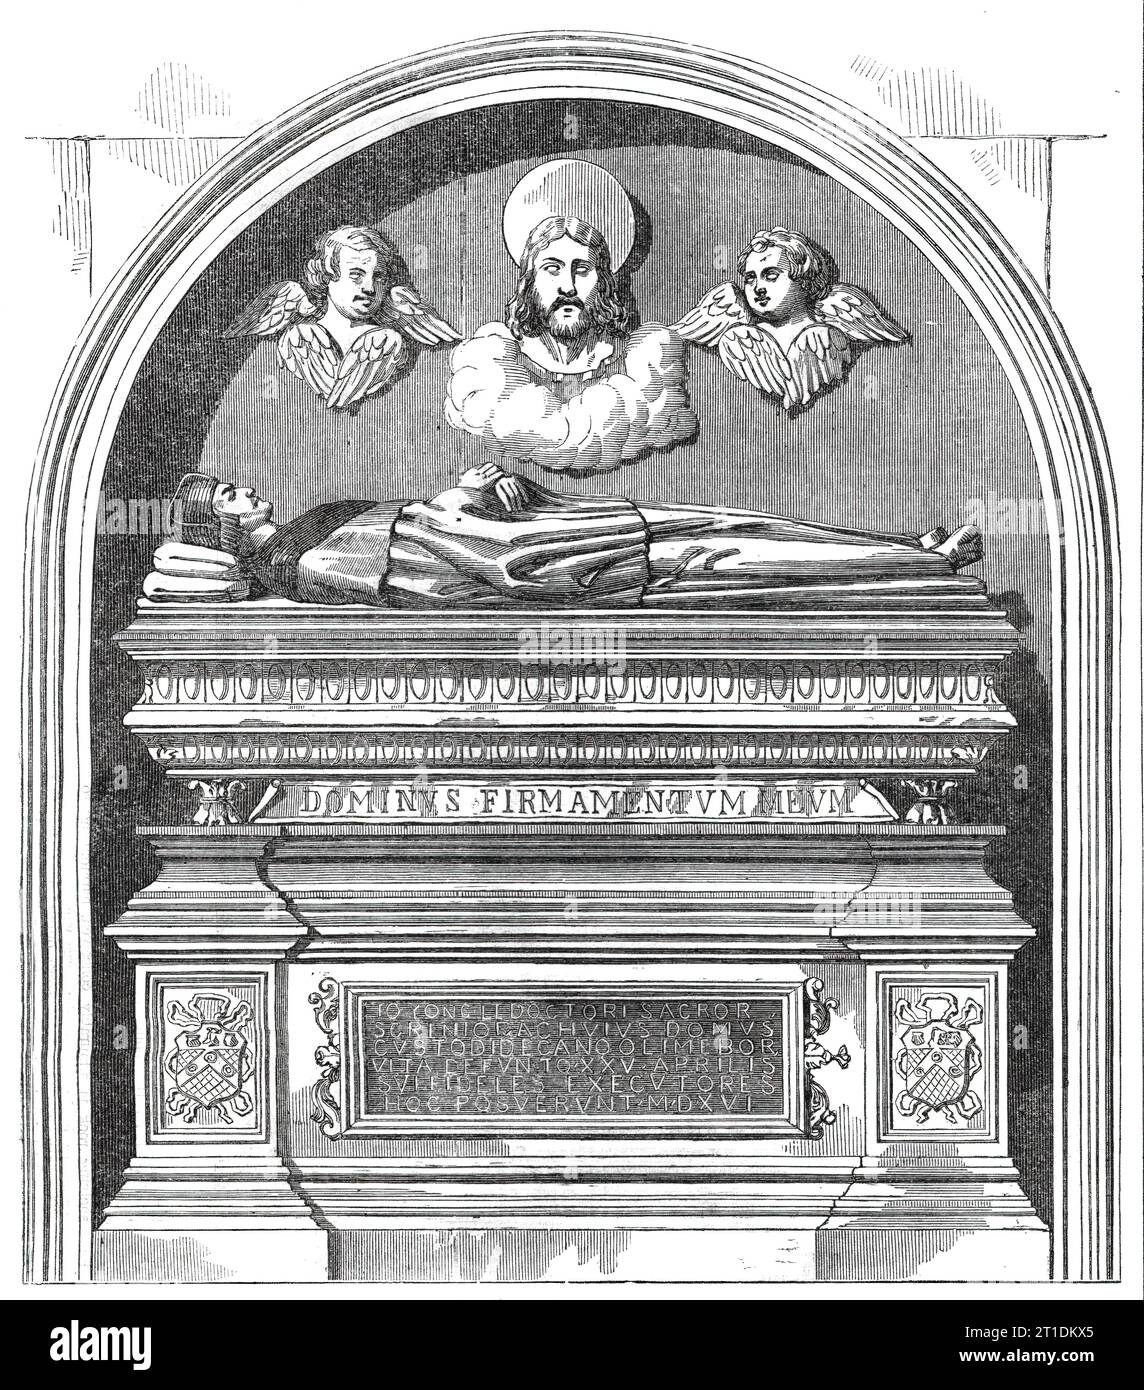 Monument to Dr. John Yonge, by Torrigiani, in the Rolls Chapel, [Chancery Lane, London], 1860. 'Among the monuments almost hidden from view in the quaint old Chapel of the Rolls - an edifice now undergoing restoration...is one by no less an artist than Torrigiani...This monument is to the memory of Dr. John Yonge, who was appointed Master of the Rolls during the reign of Henry VII., and retained the office until his death [in 1516]...It represents the effigy in a recumbent attitude, habited in a long red robe and deep square cap, the face of the figure being wonderfully fine. In a recess above Stock Photo